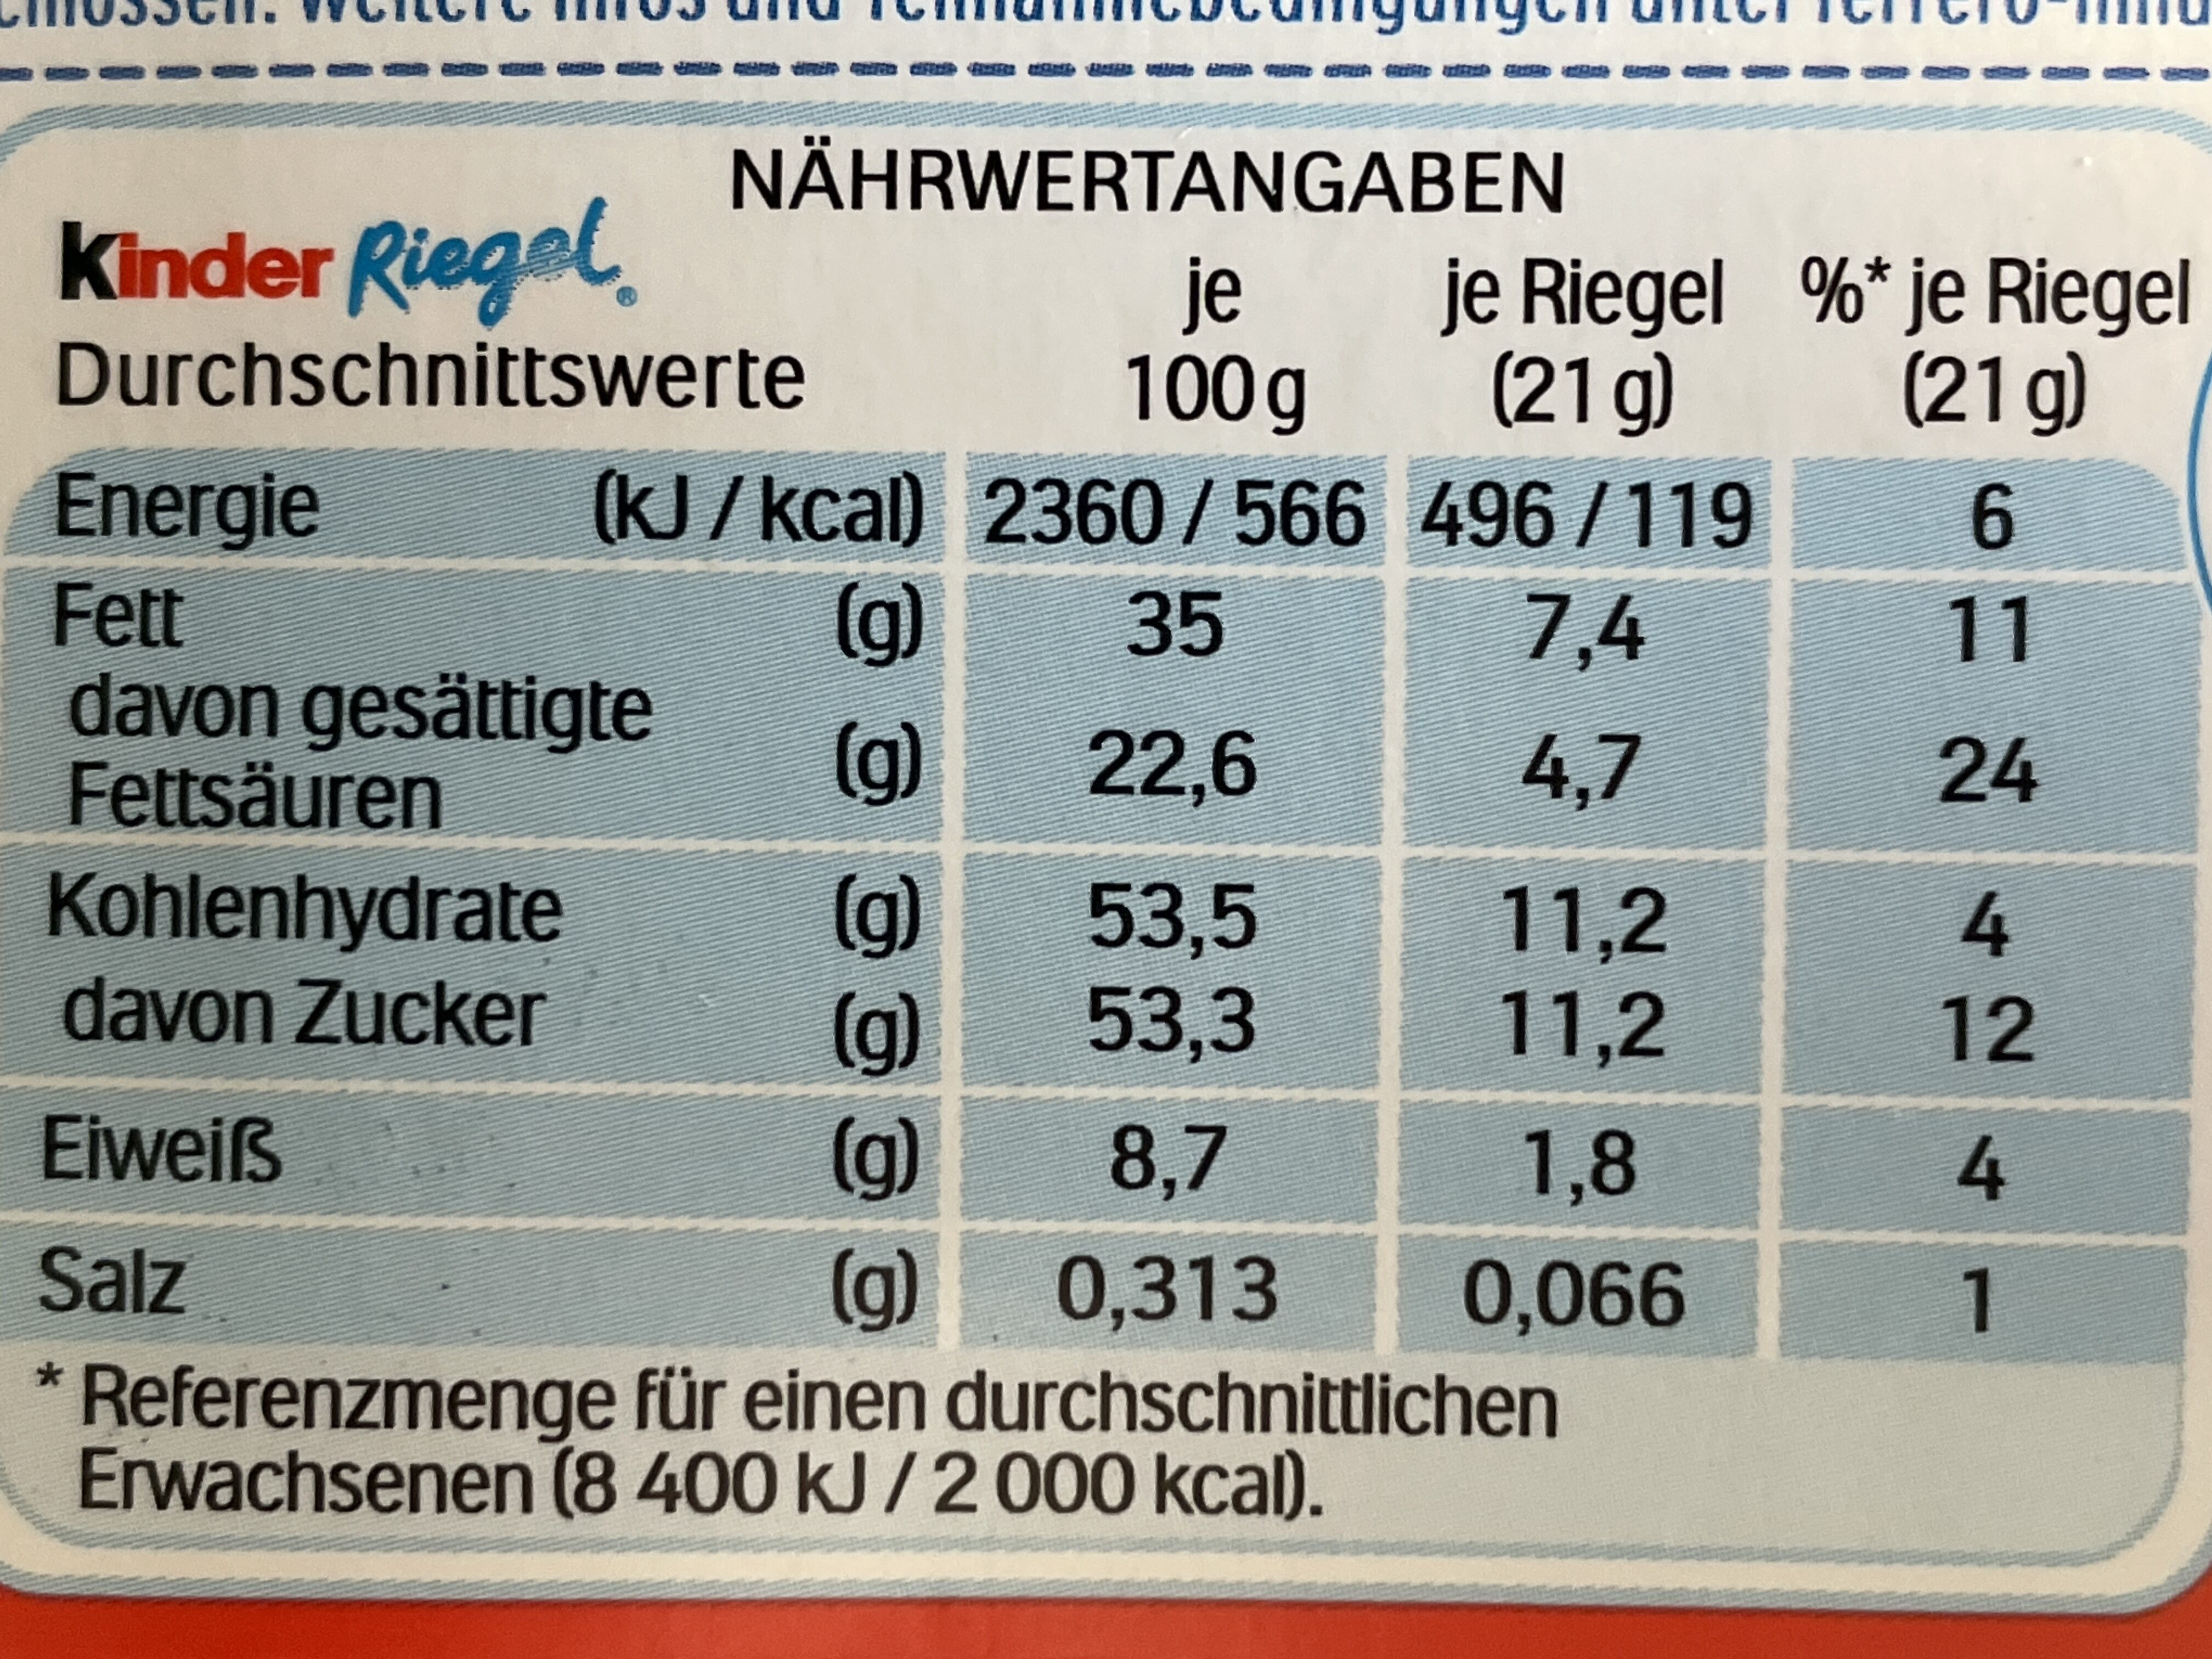 Kinder Maxi-3,79€/2.9 - Nutrition facts